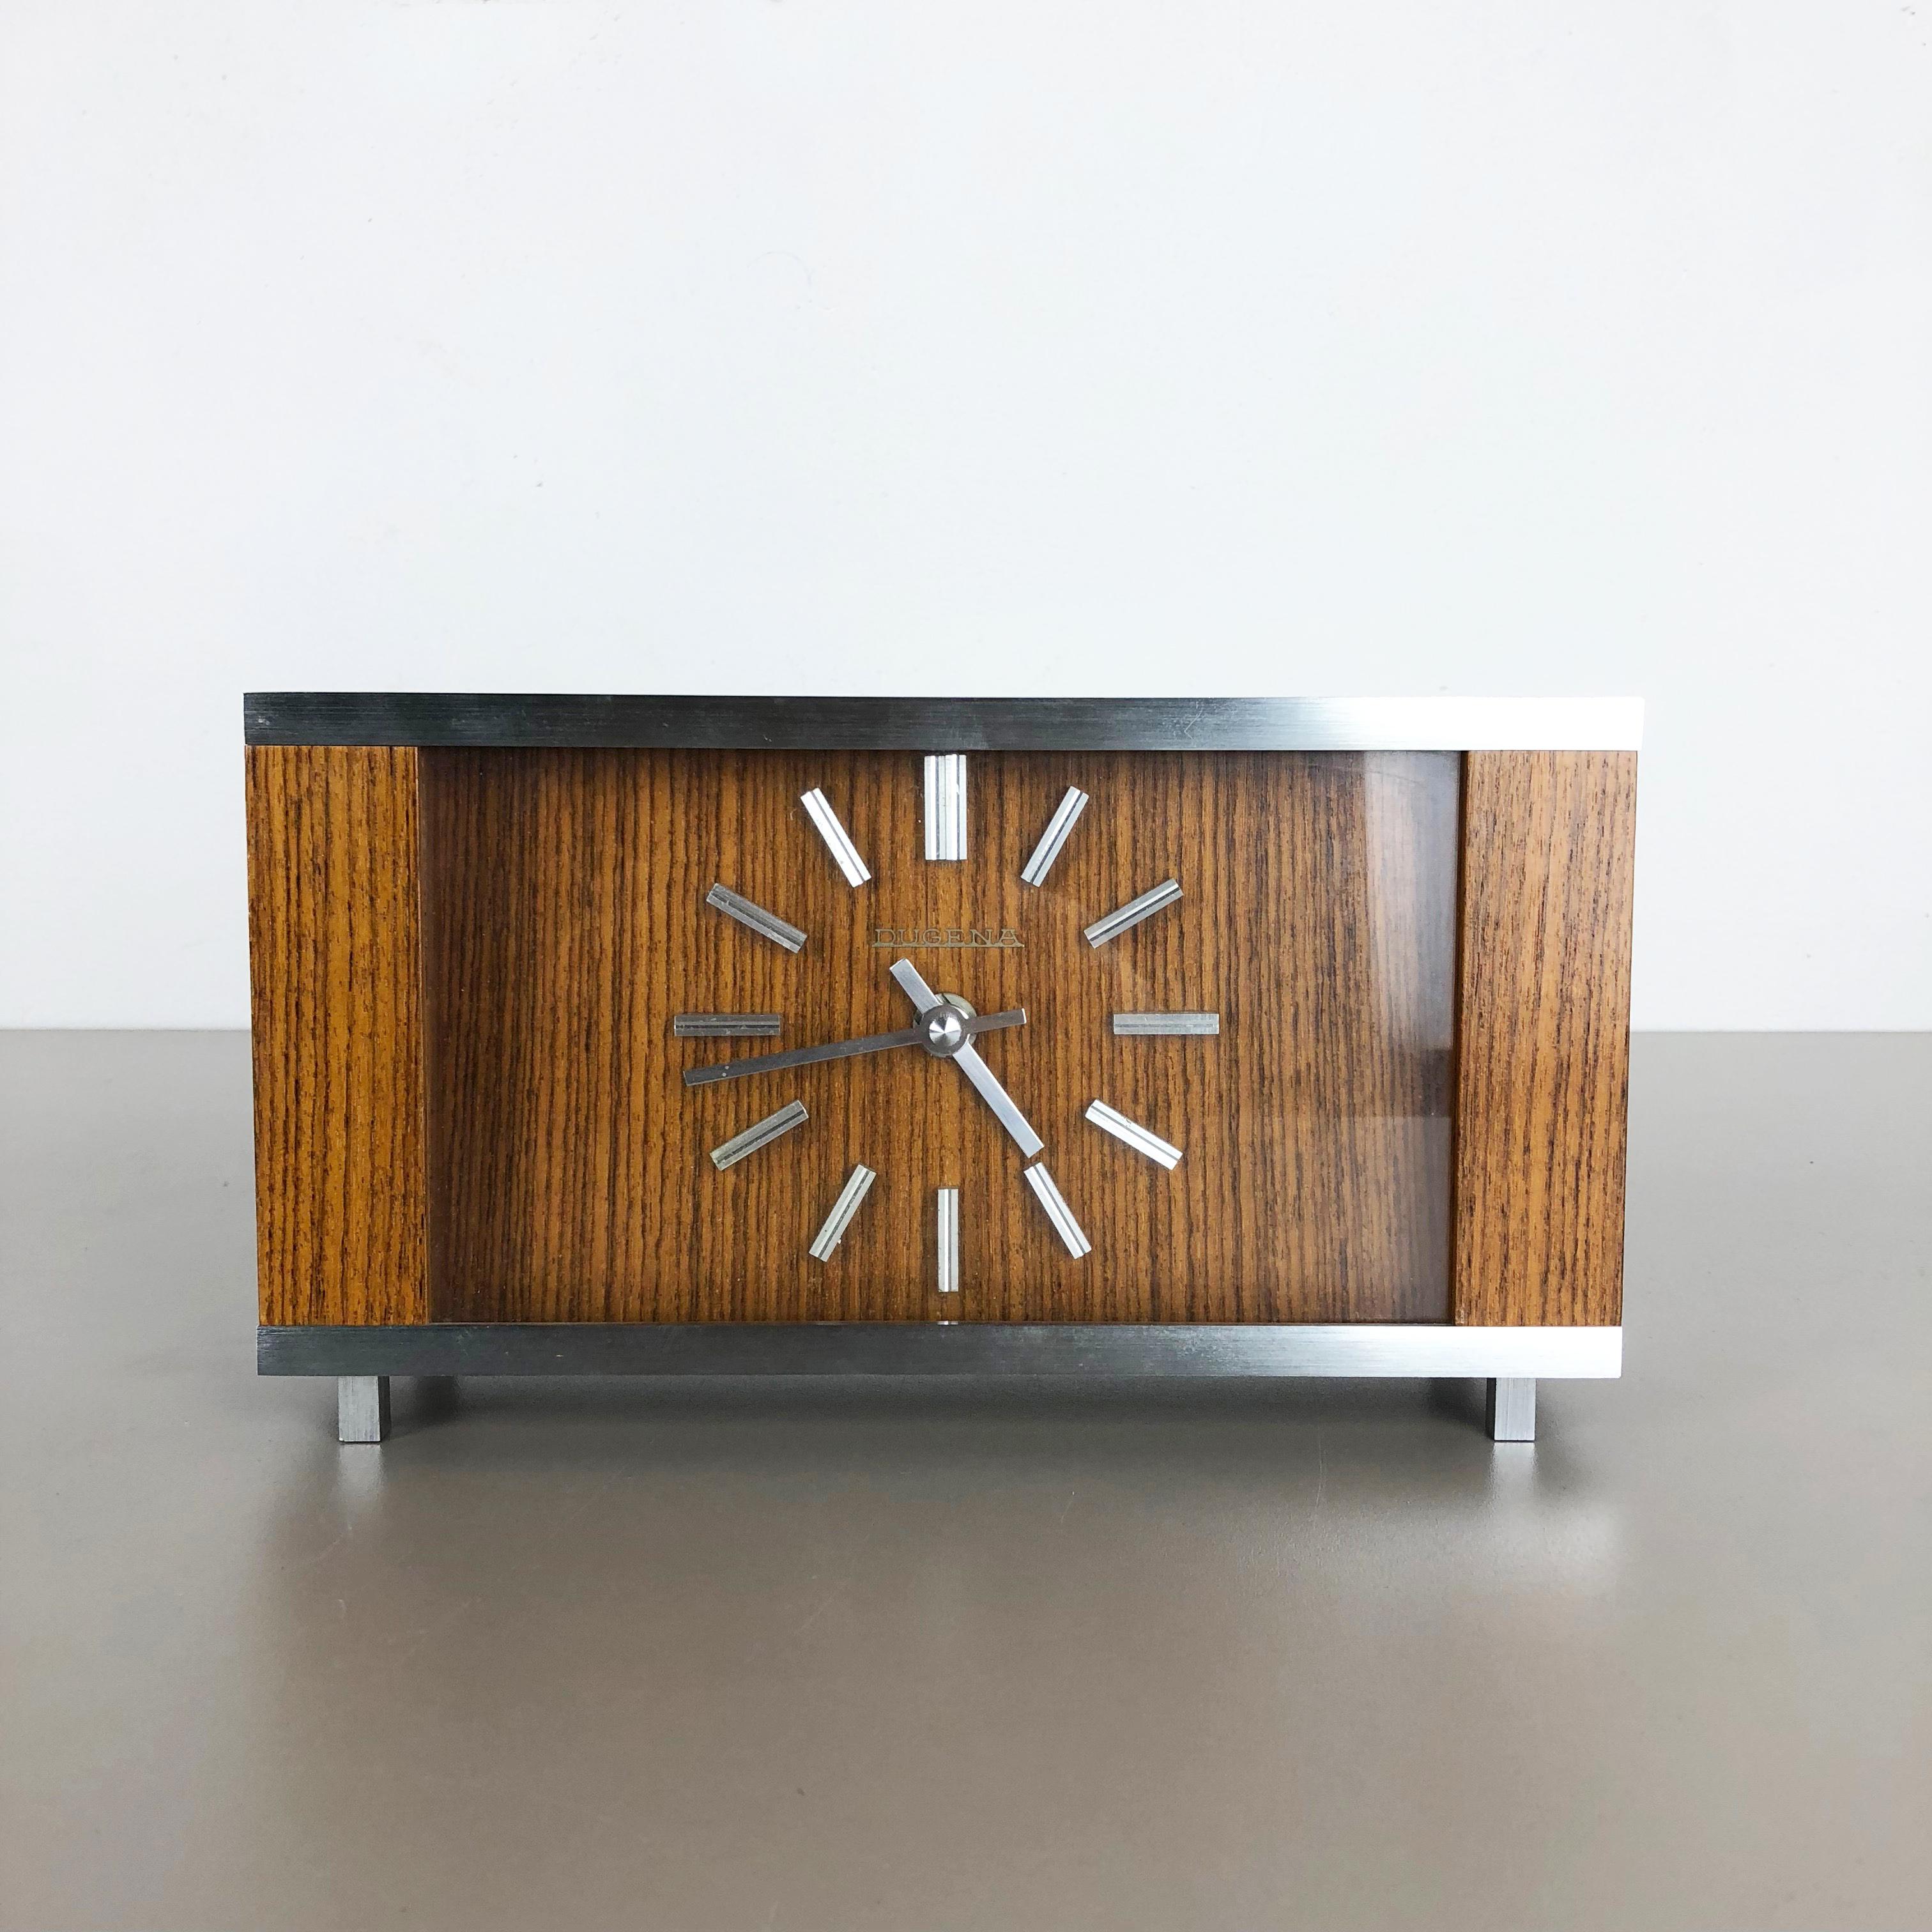 Vintage 1960s Modernist Wooden Table Clock by Dugena, Germany 2